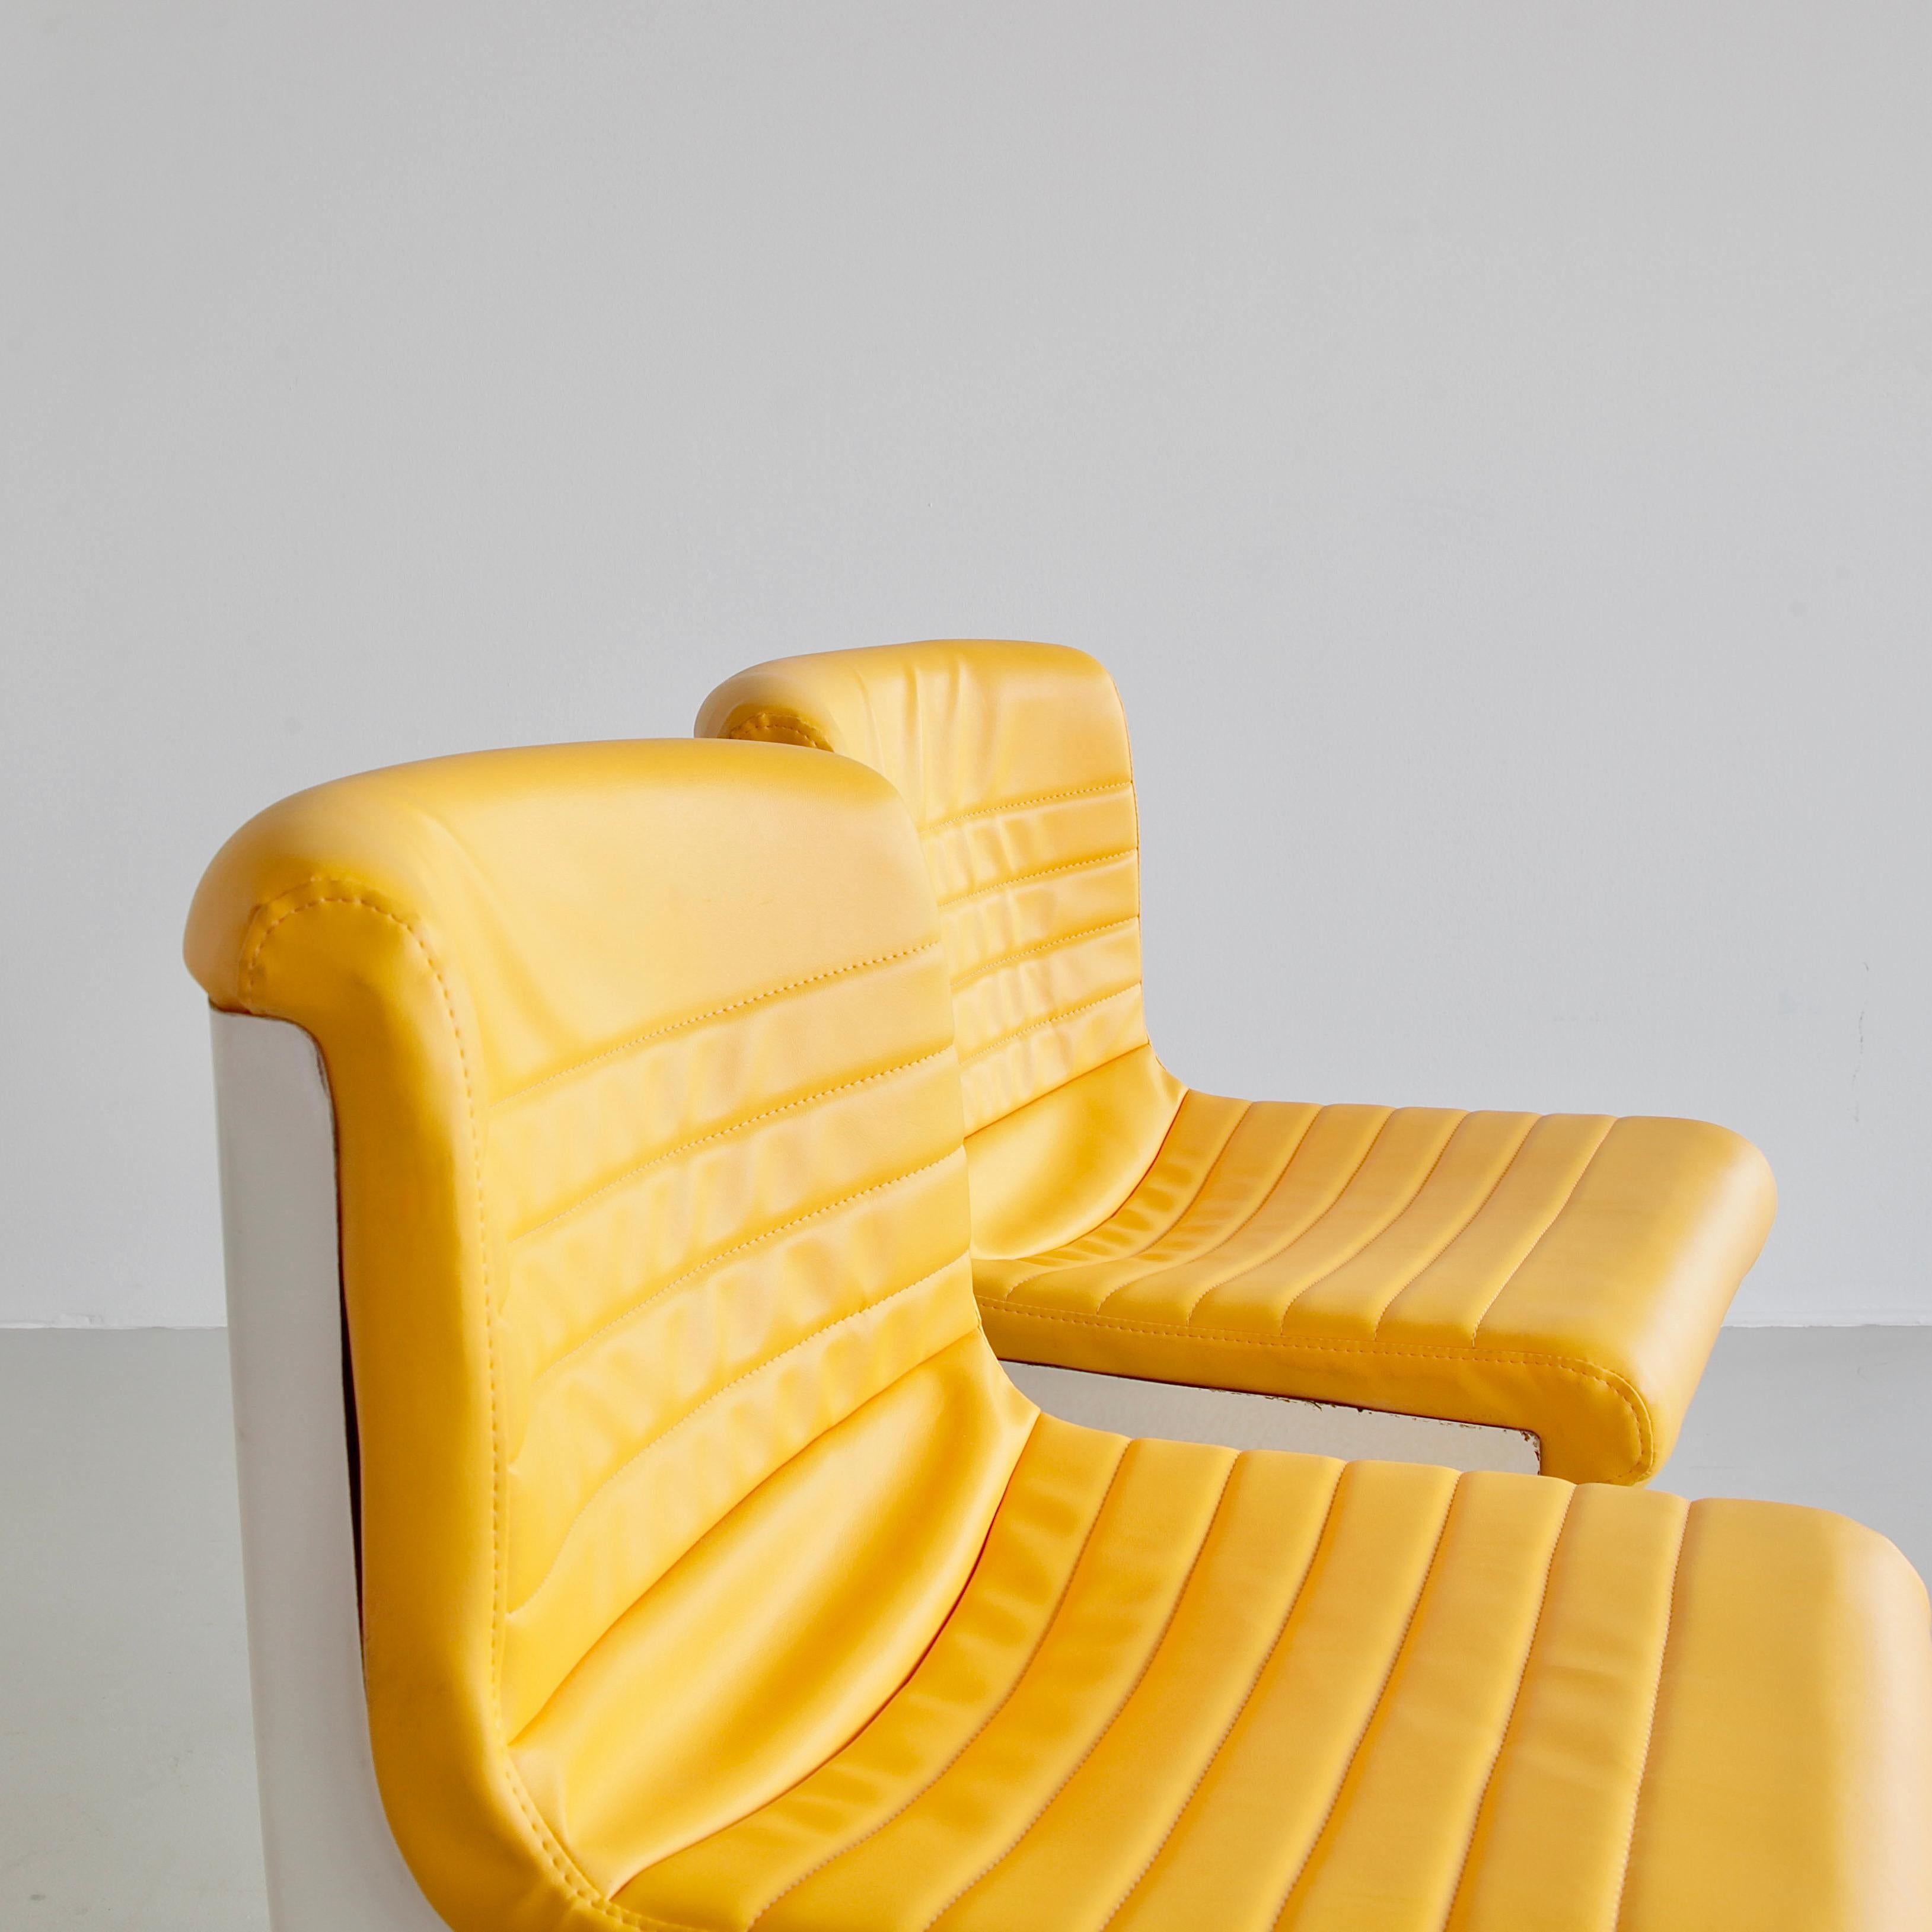 Pair of office chairs designed by Ettore Sottsass and Hans Von Klier. Italy, Design Centre (Poltronova), 1969.

An original set of the 'PROGRESS' swivel chairs, height-adjustable. Original yellow leatherette upholstery, frame in cast aluminium with